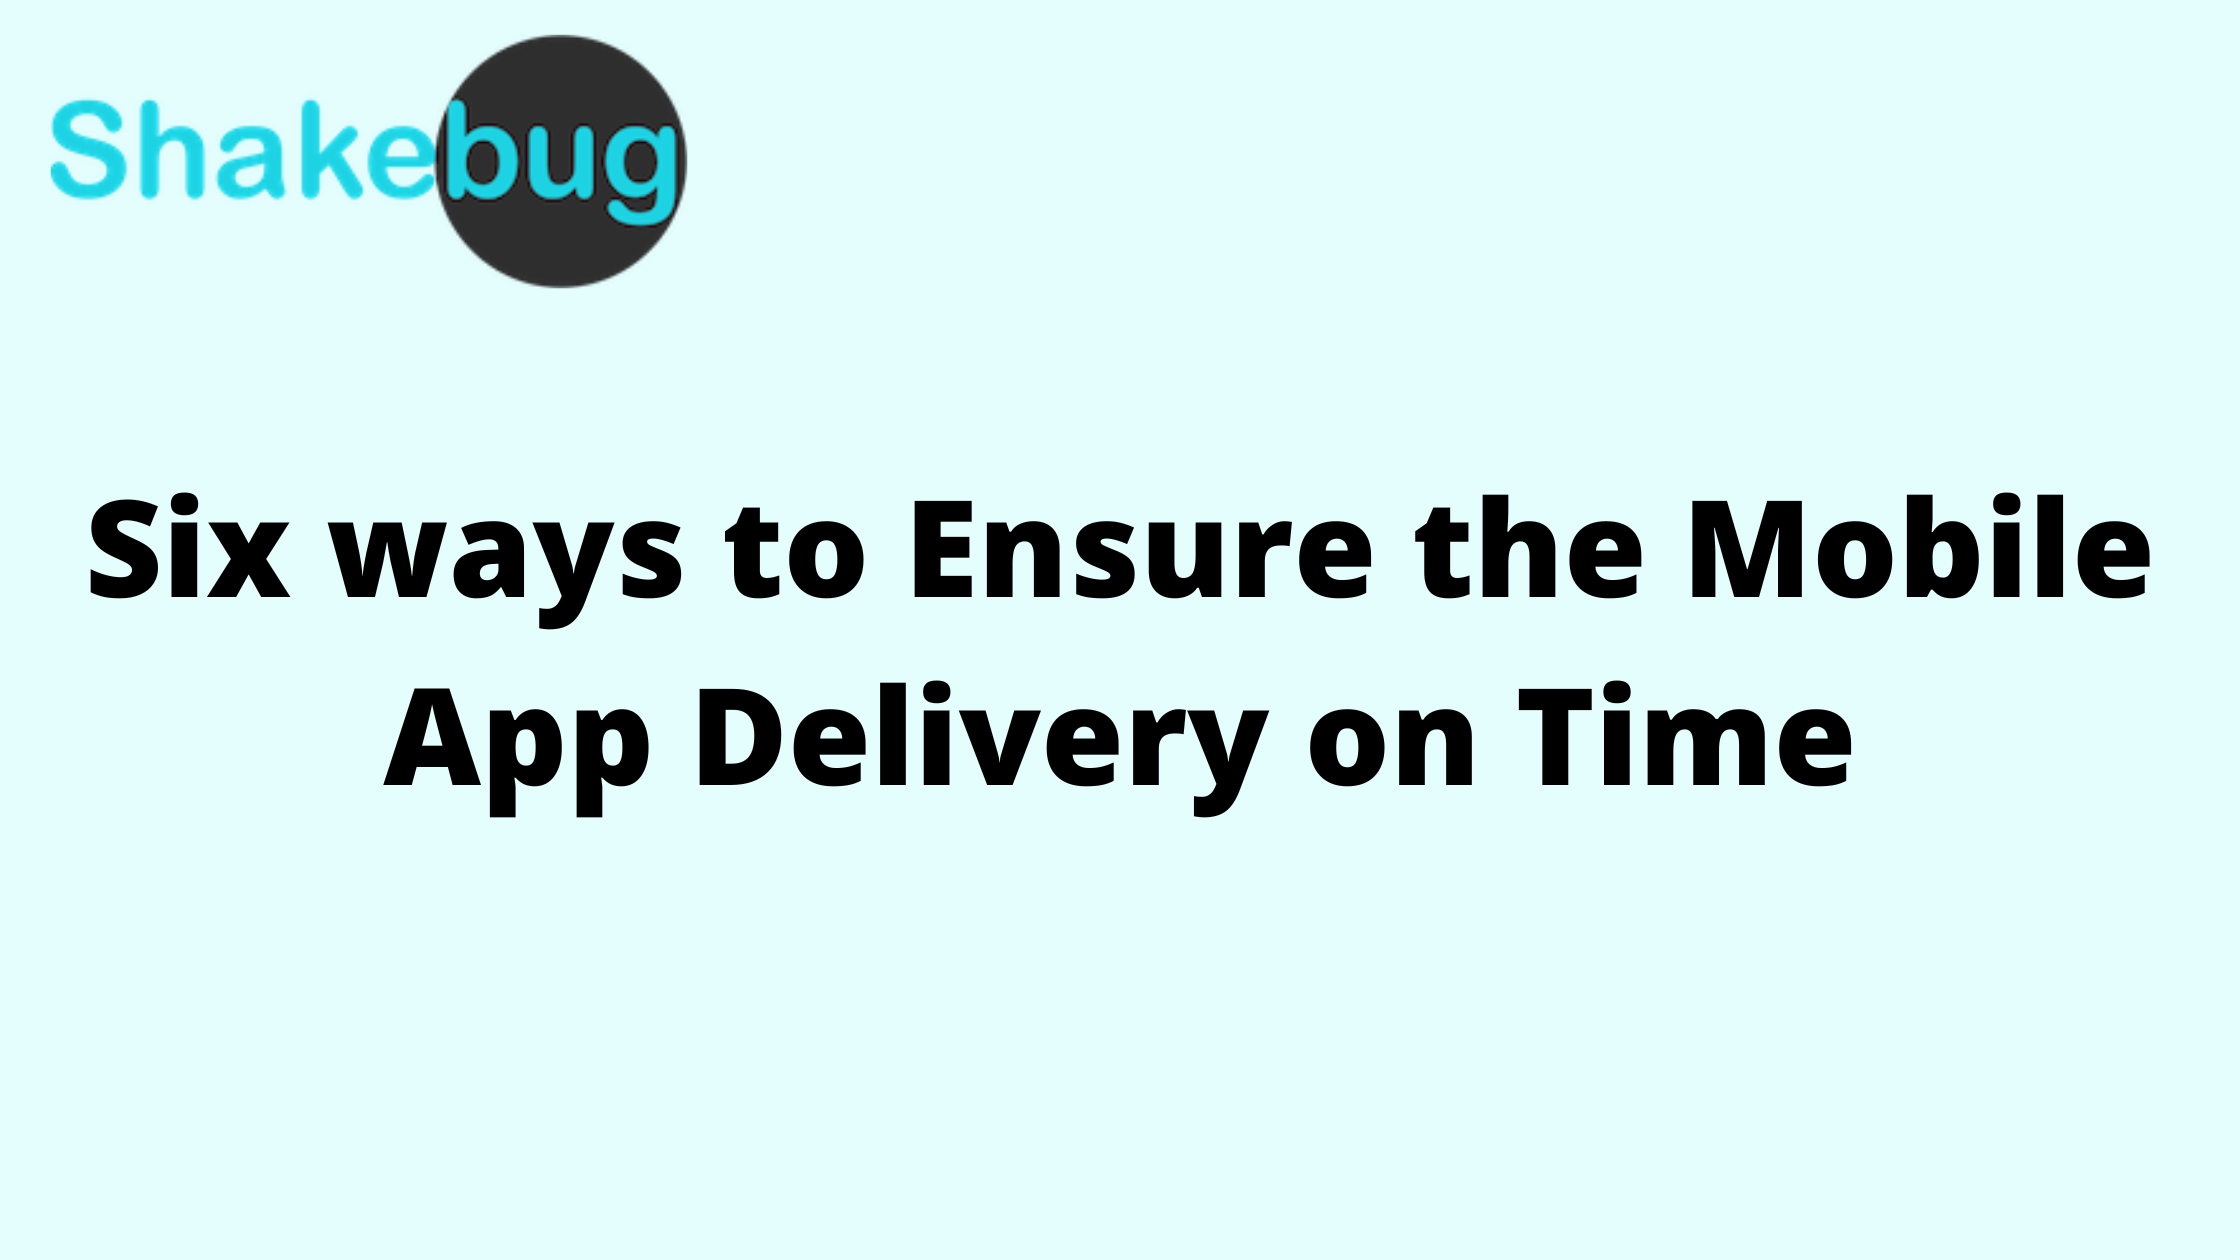 Six ways to Ensure the Mobile App Delivery on Time